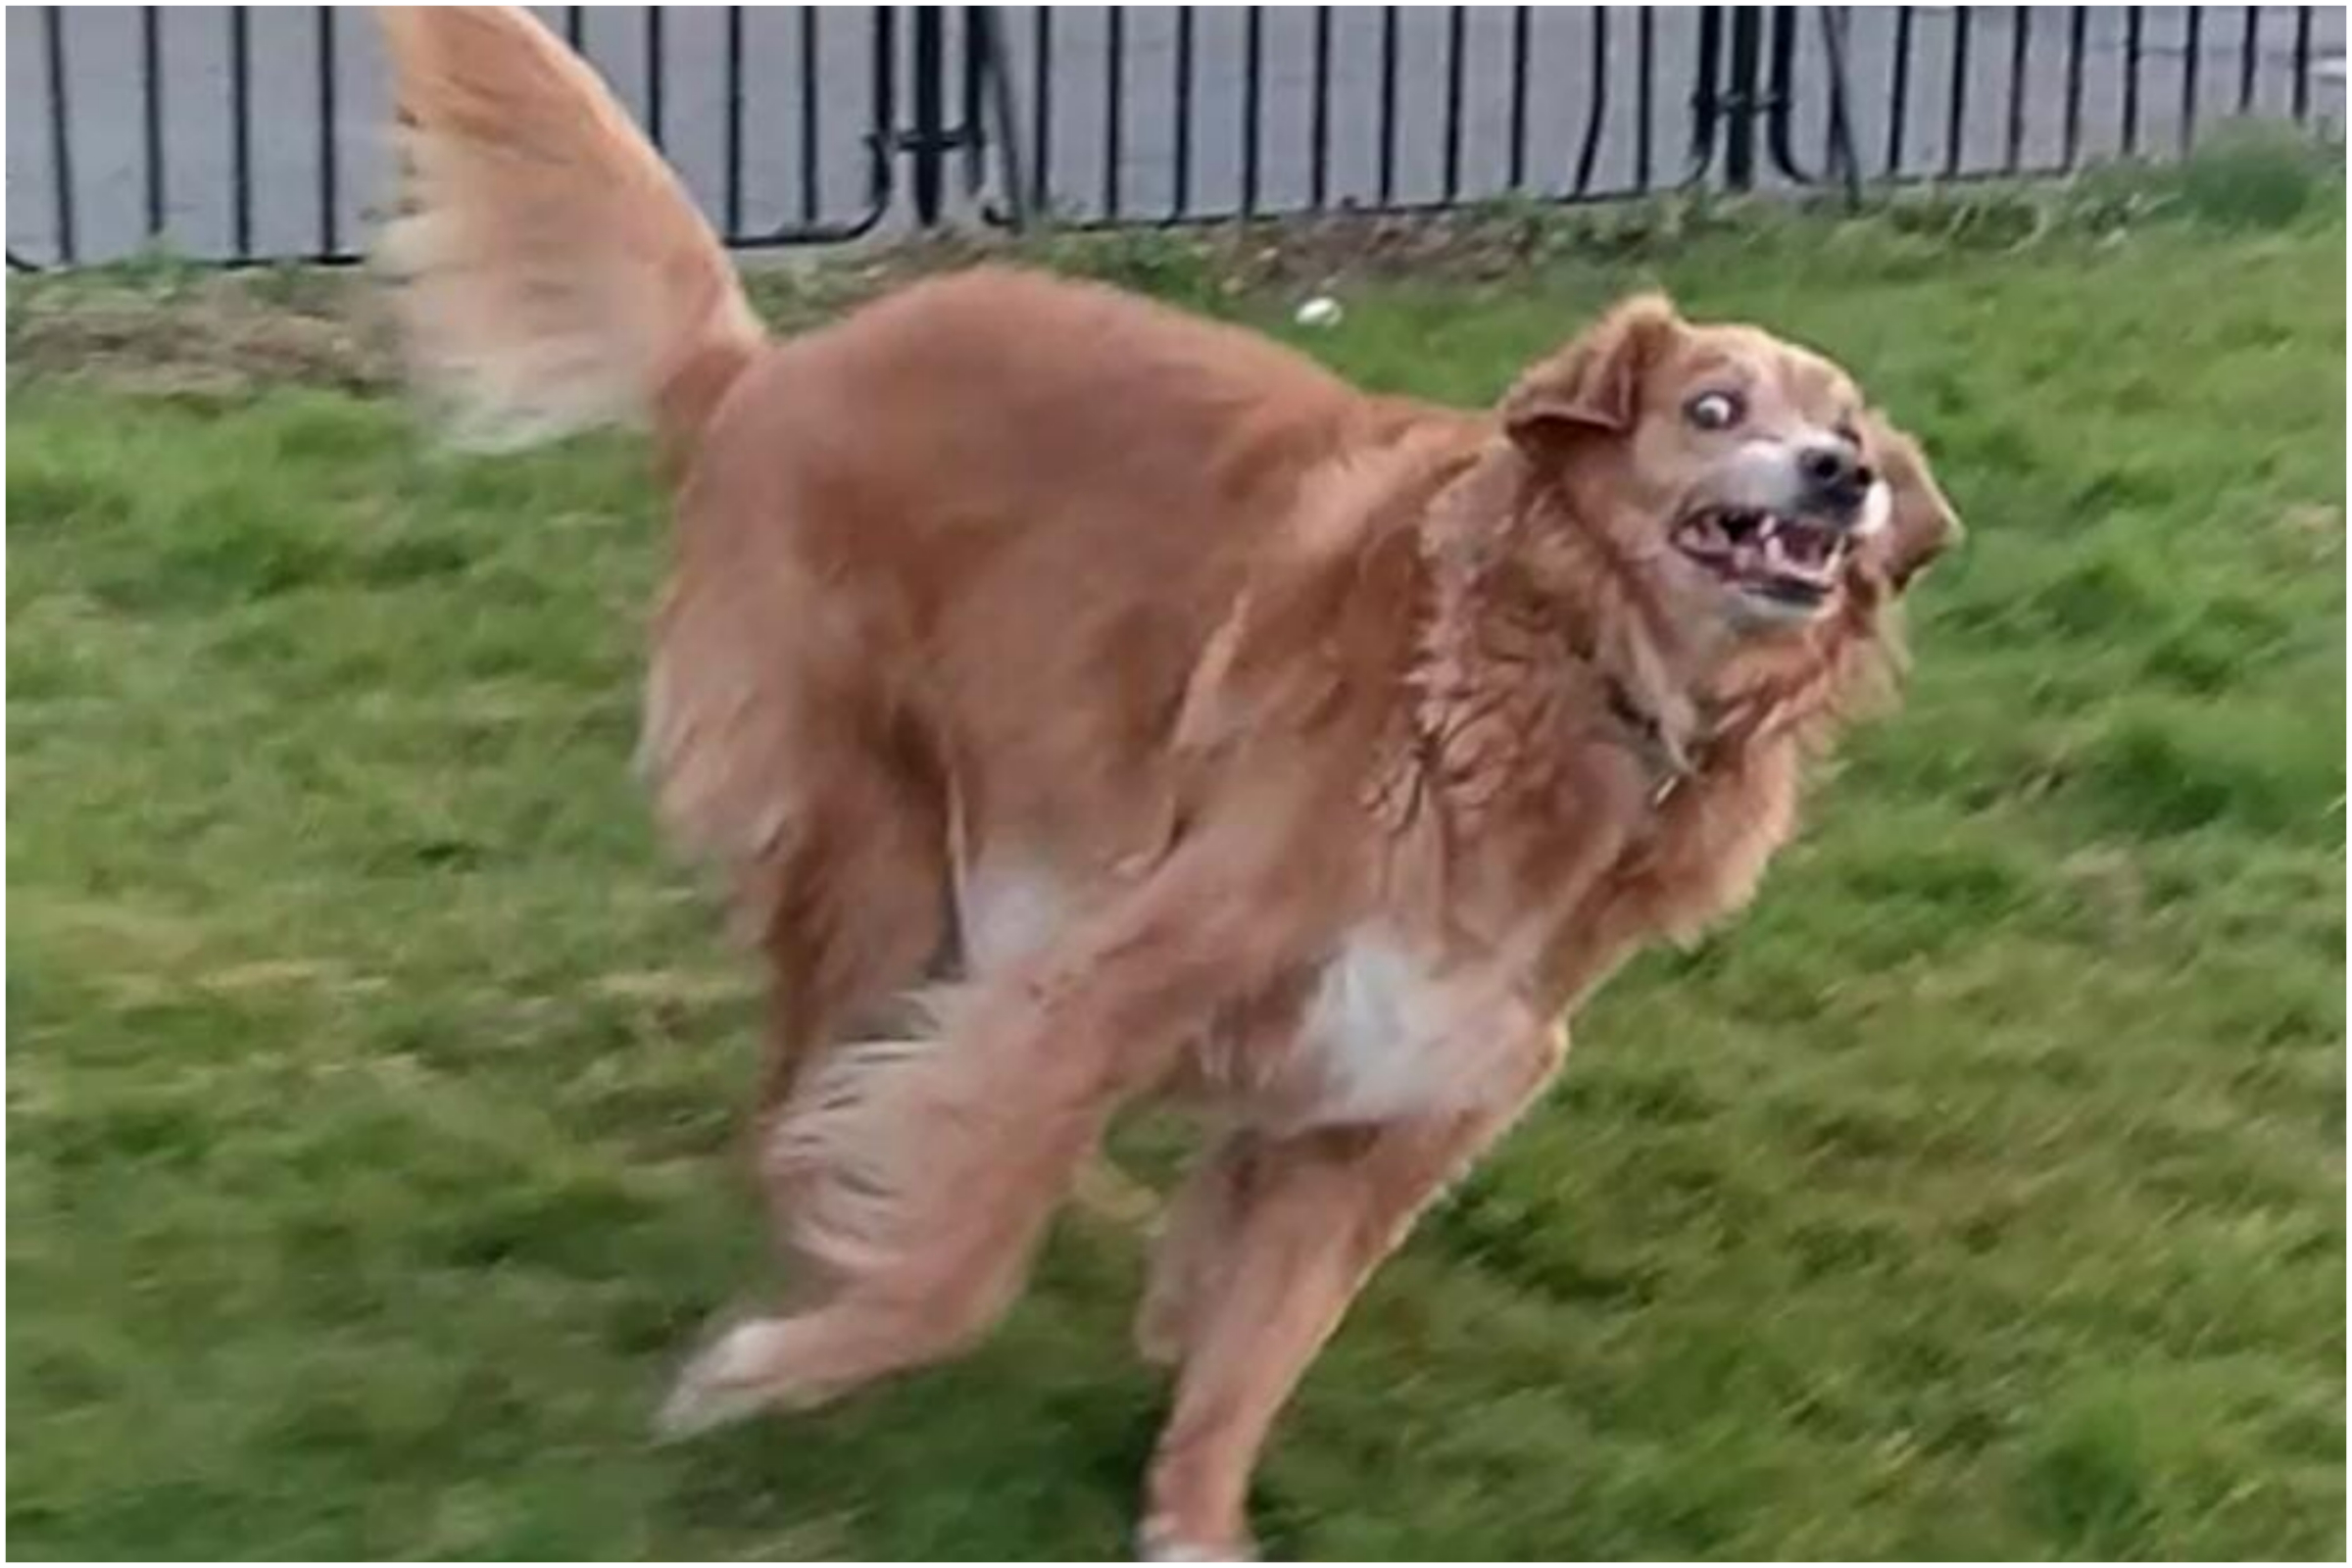 Dog's Hilarious Expression Perfectly Caught on Camera: 'Time of His Life'